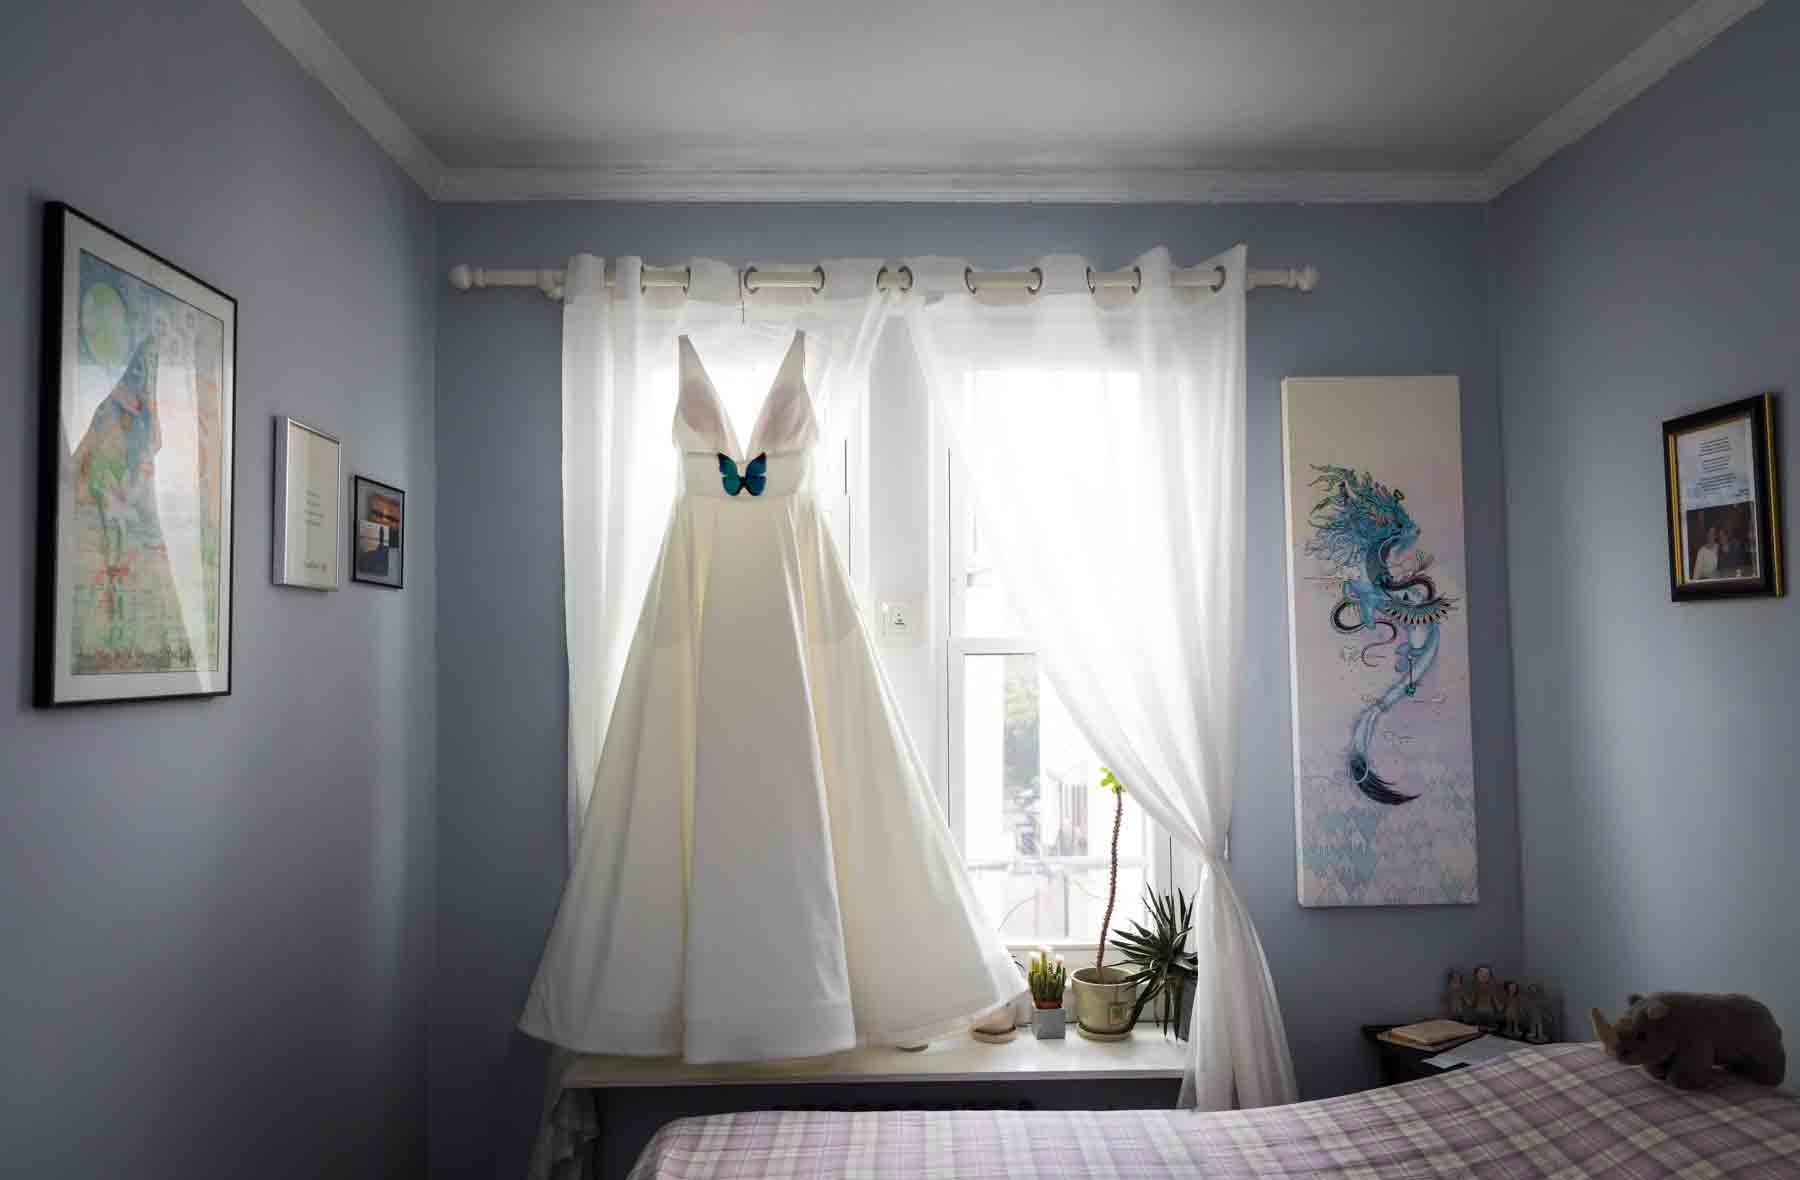 Wedding dress with butterfly hanging on curtain rod in bedroom